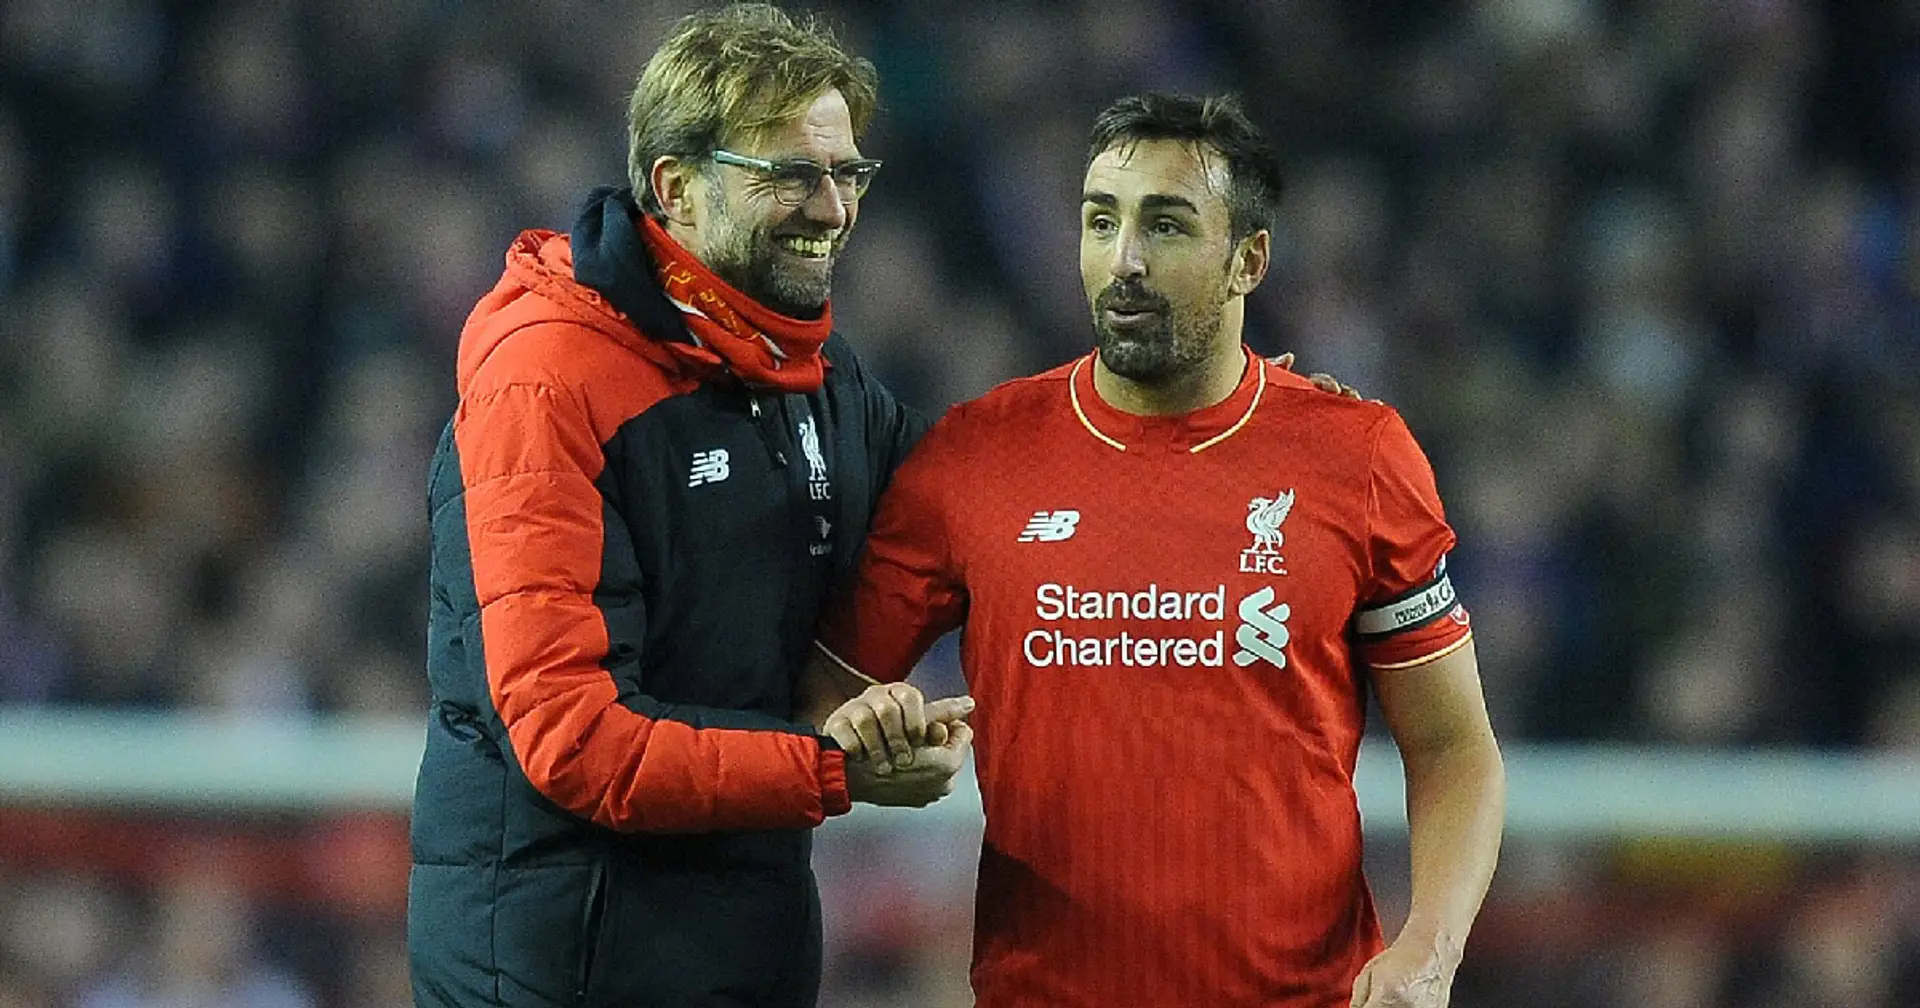 'The fans were great, so respectful as well': Jose Enrique recollects experience from the stands during Champions League semi-final last season